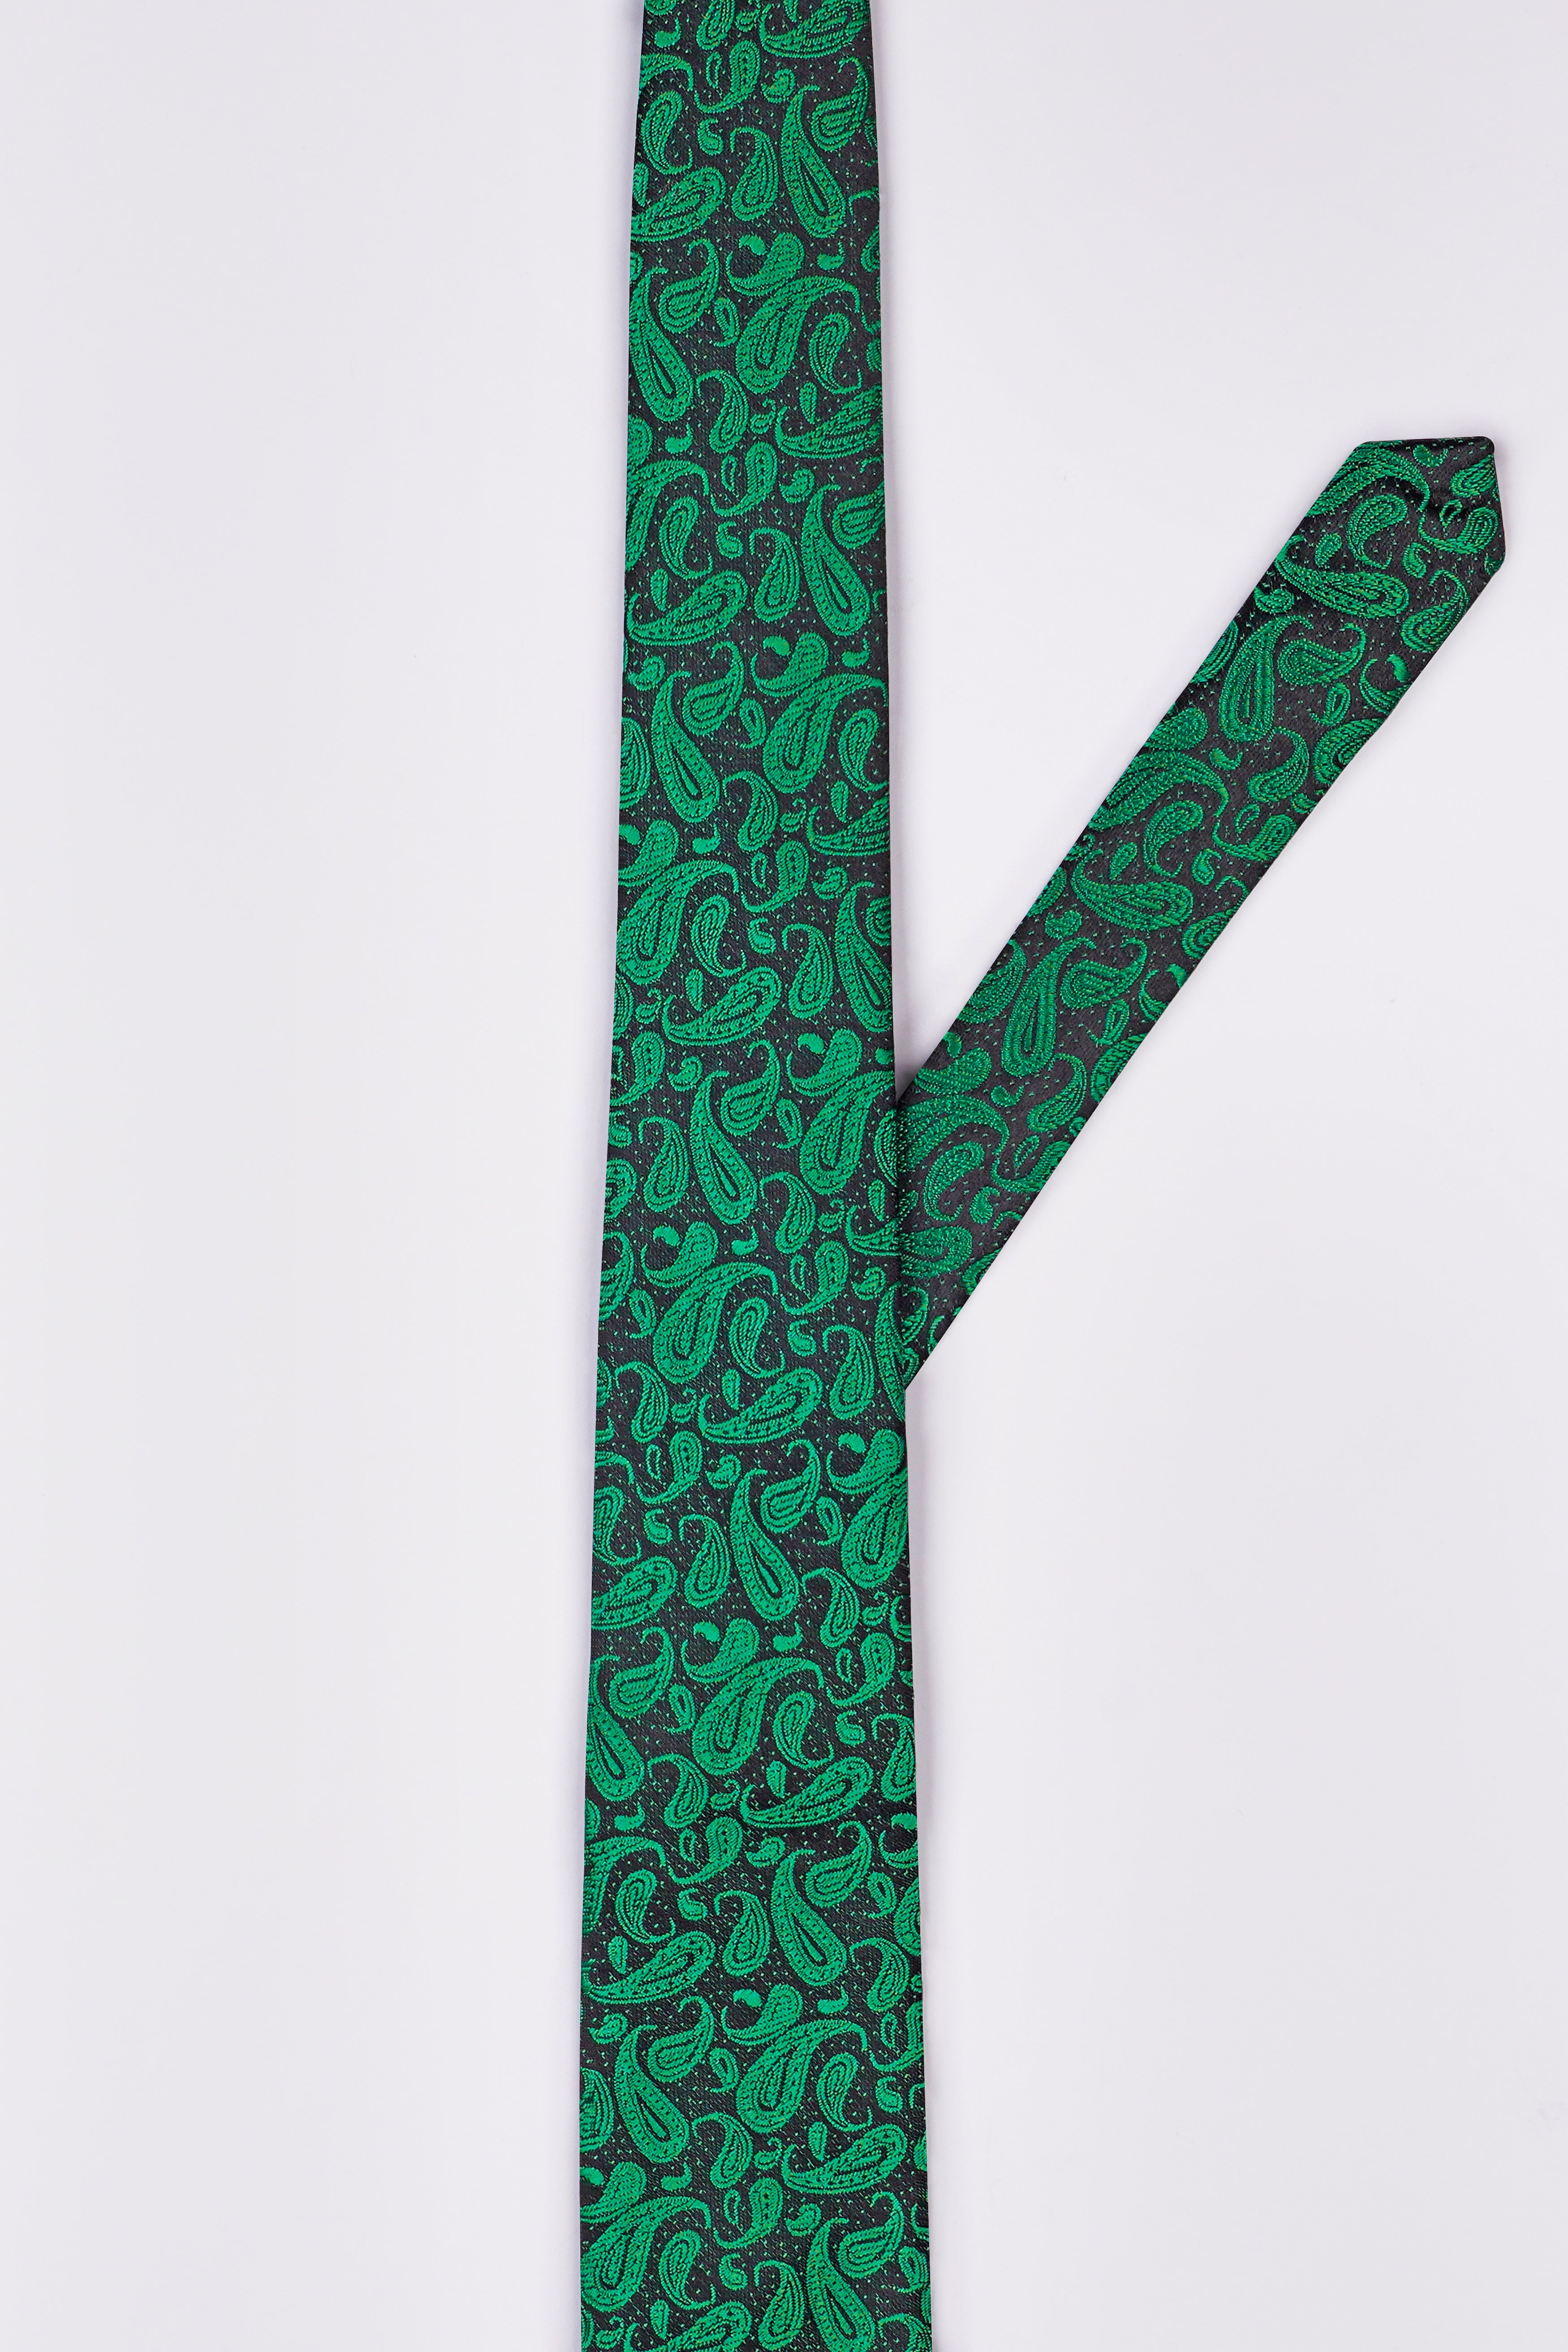 Jade Black with Meadow Green Paisley Jacquard Tie with Free Pocket Square TP048